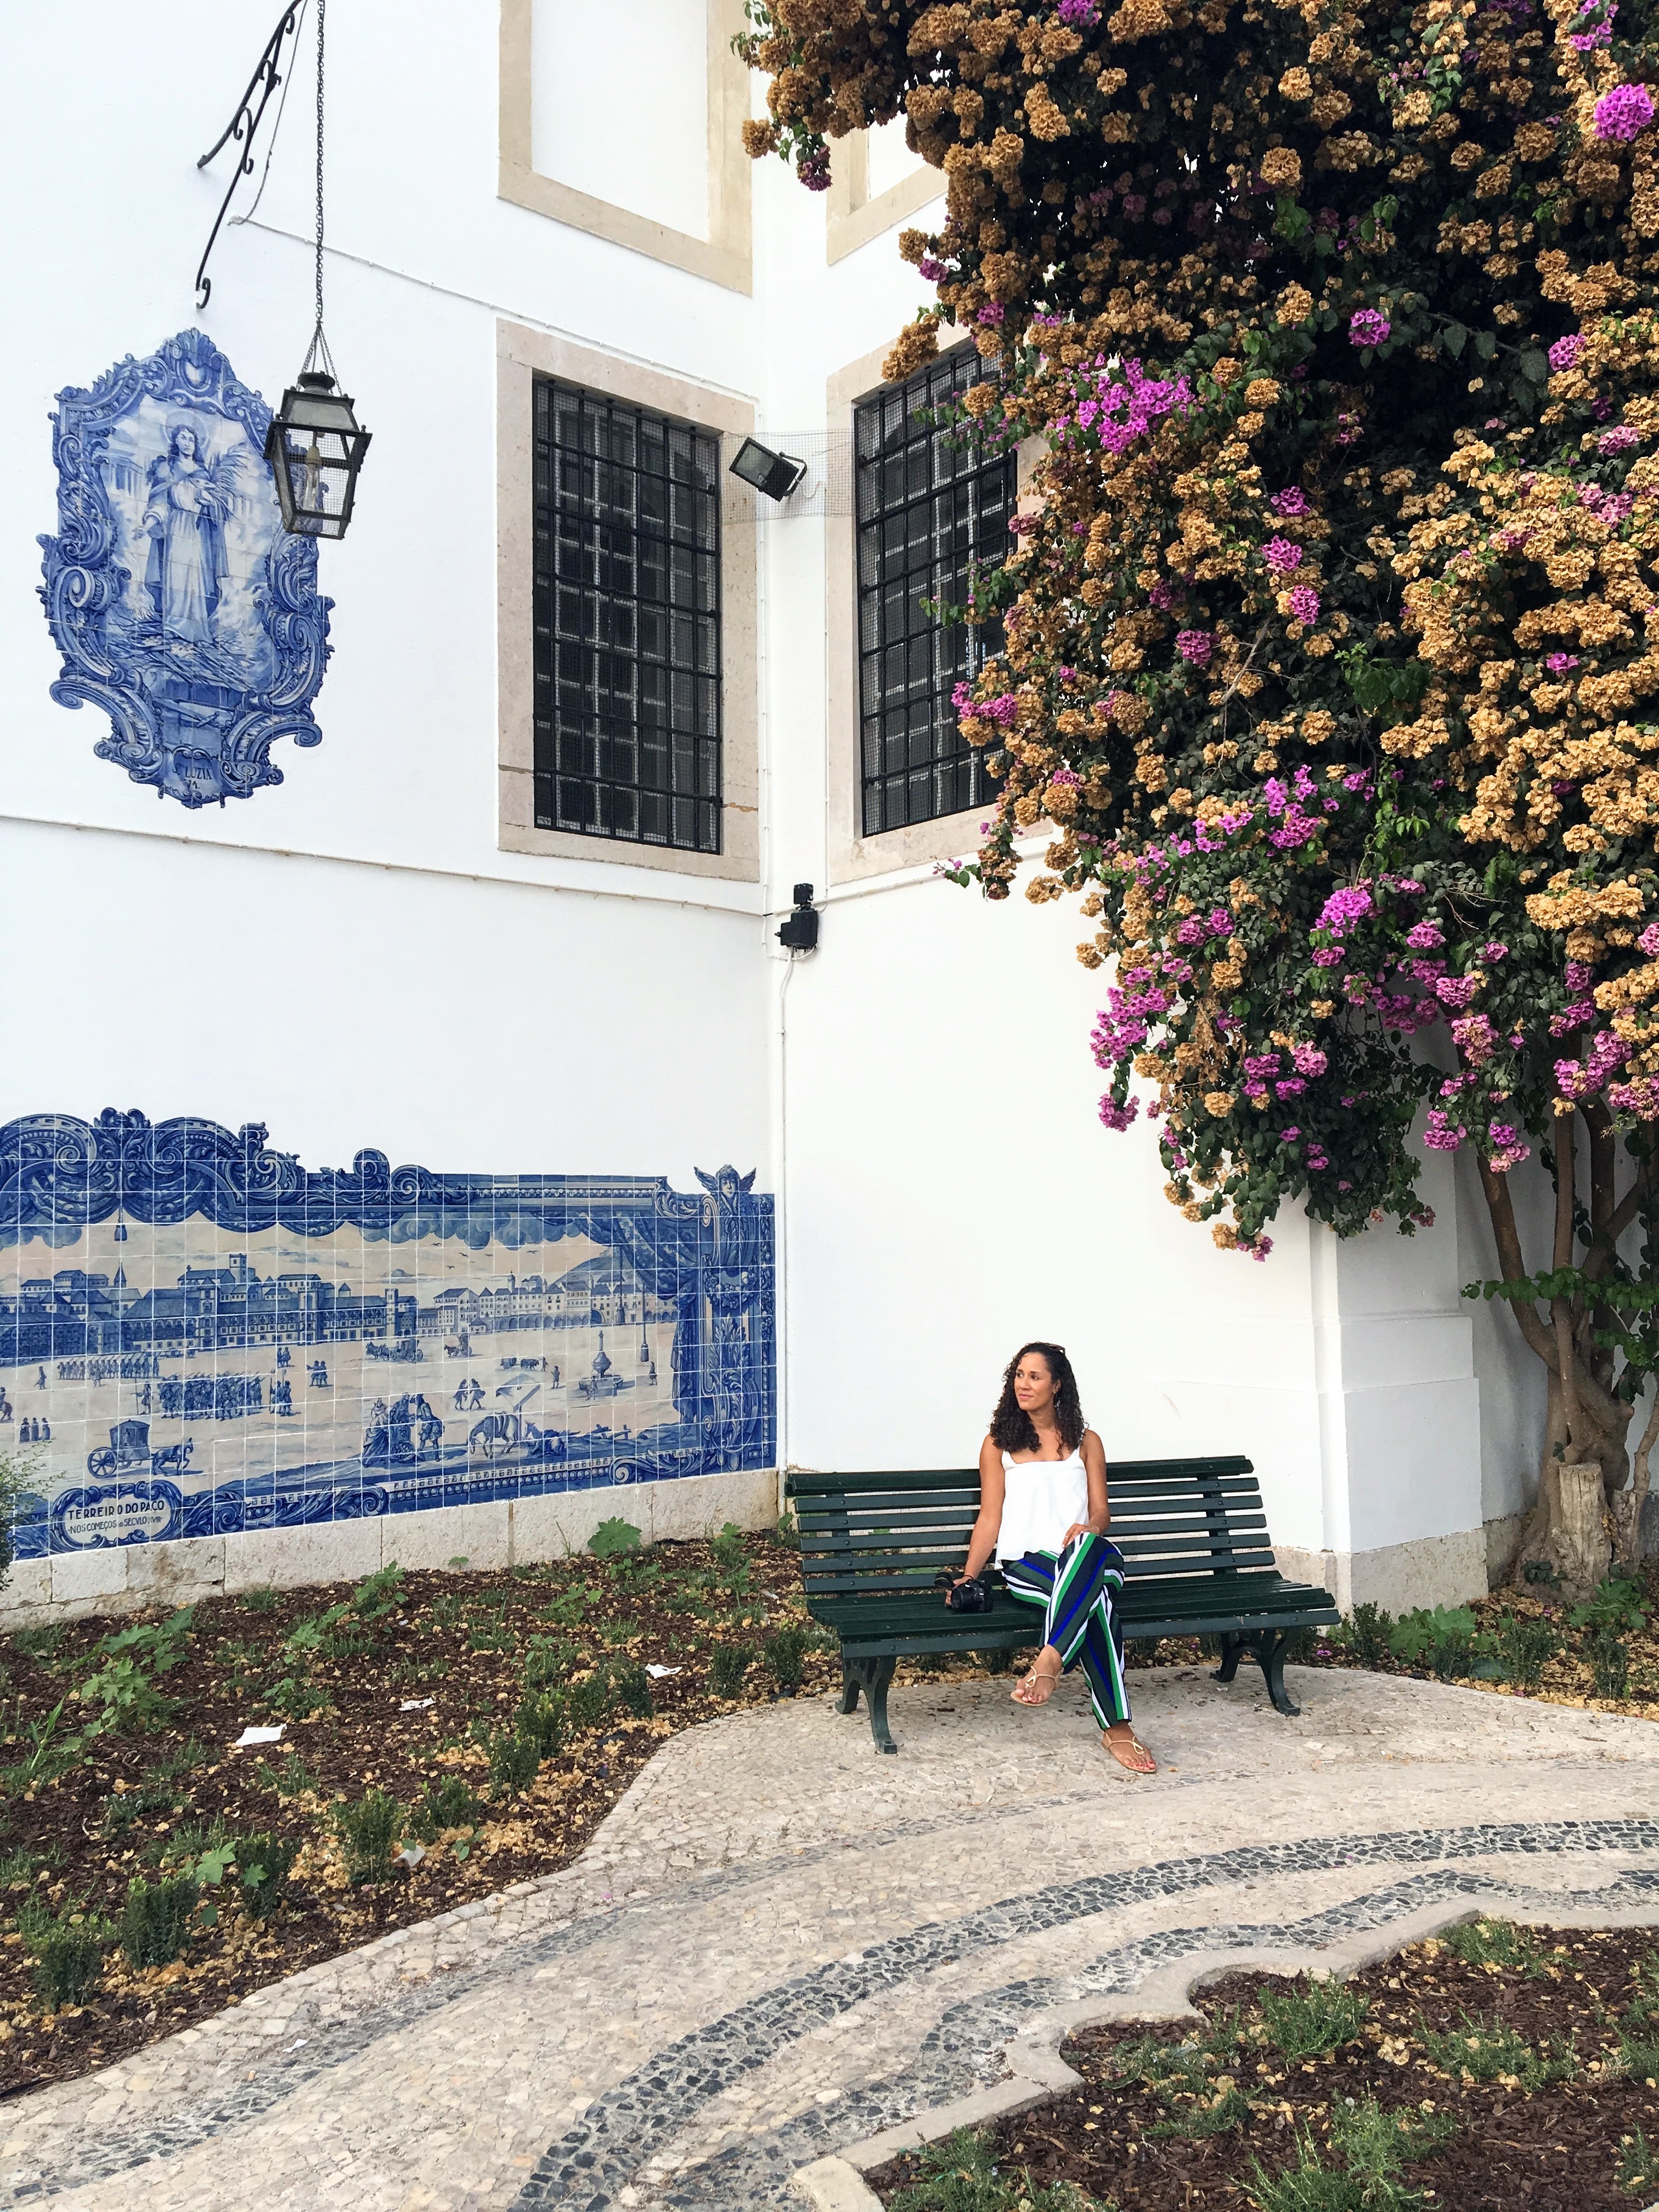 Sitting on a bench under a flowering tree in Lisbon, Portugal